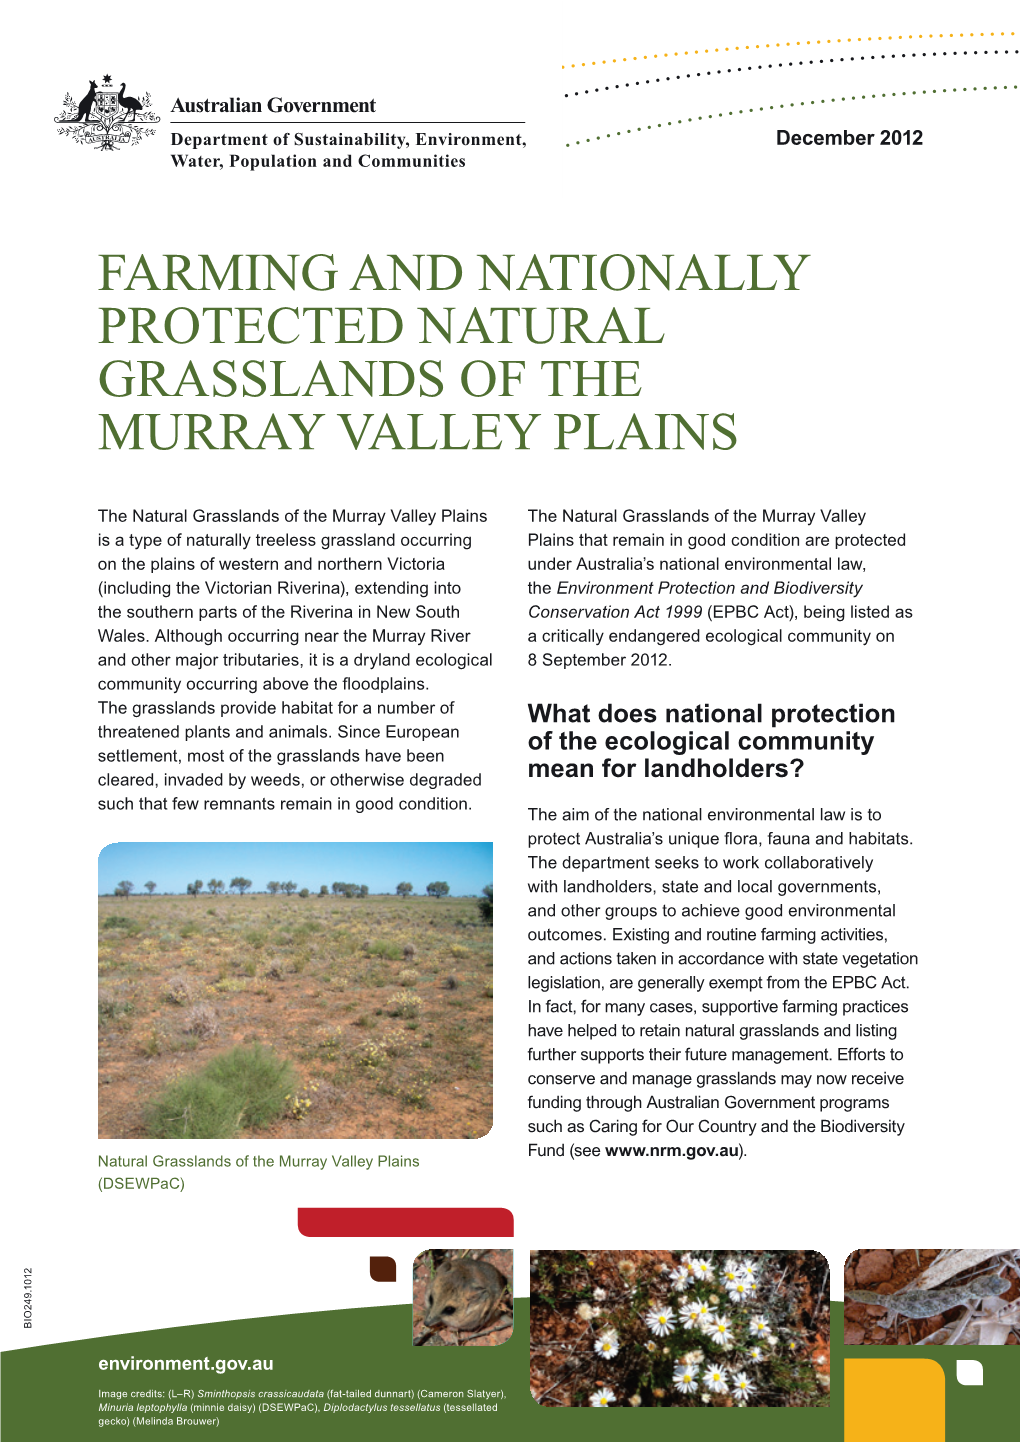 Farming and Nationally Protected Natural Grasslands of the Murray Valley Plains